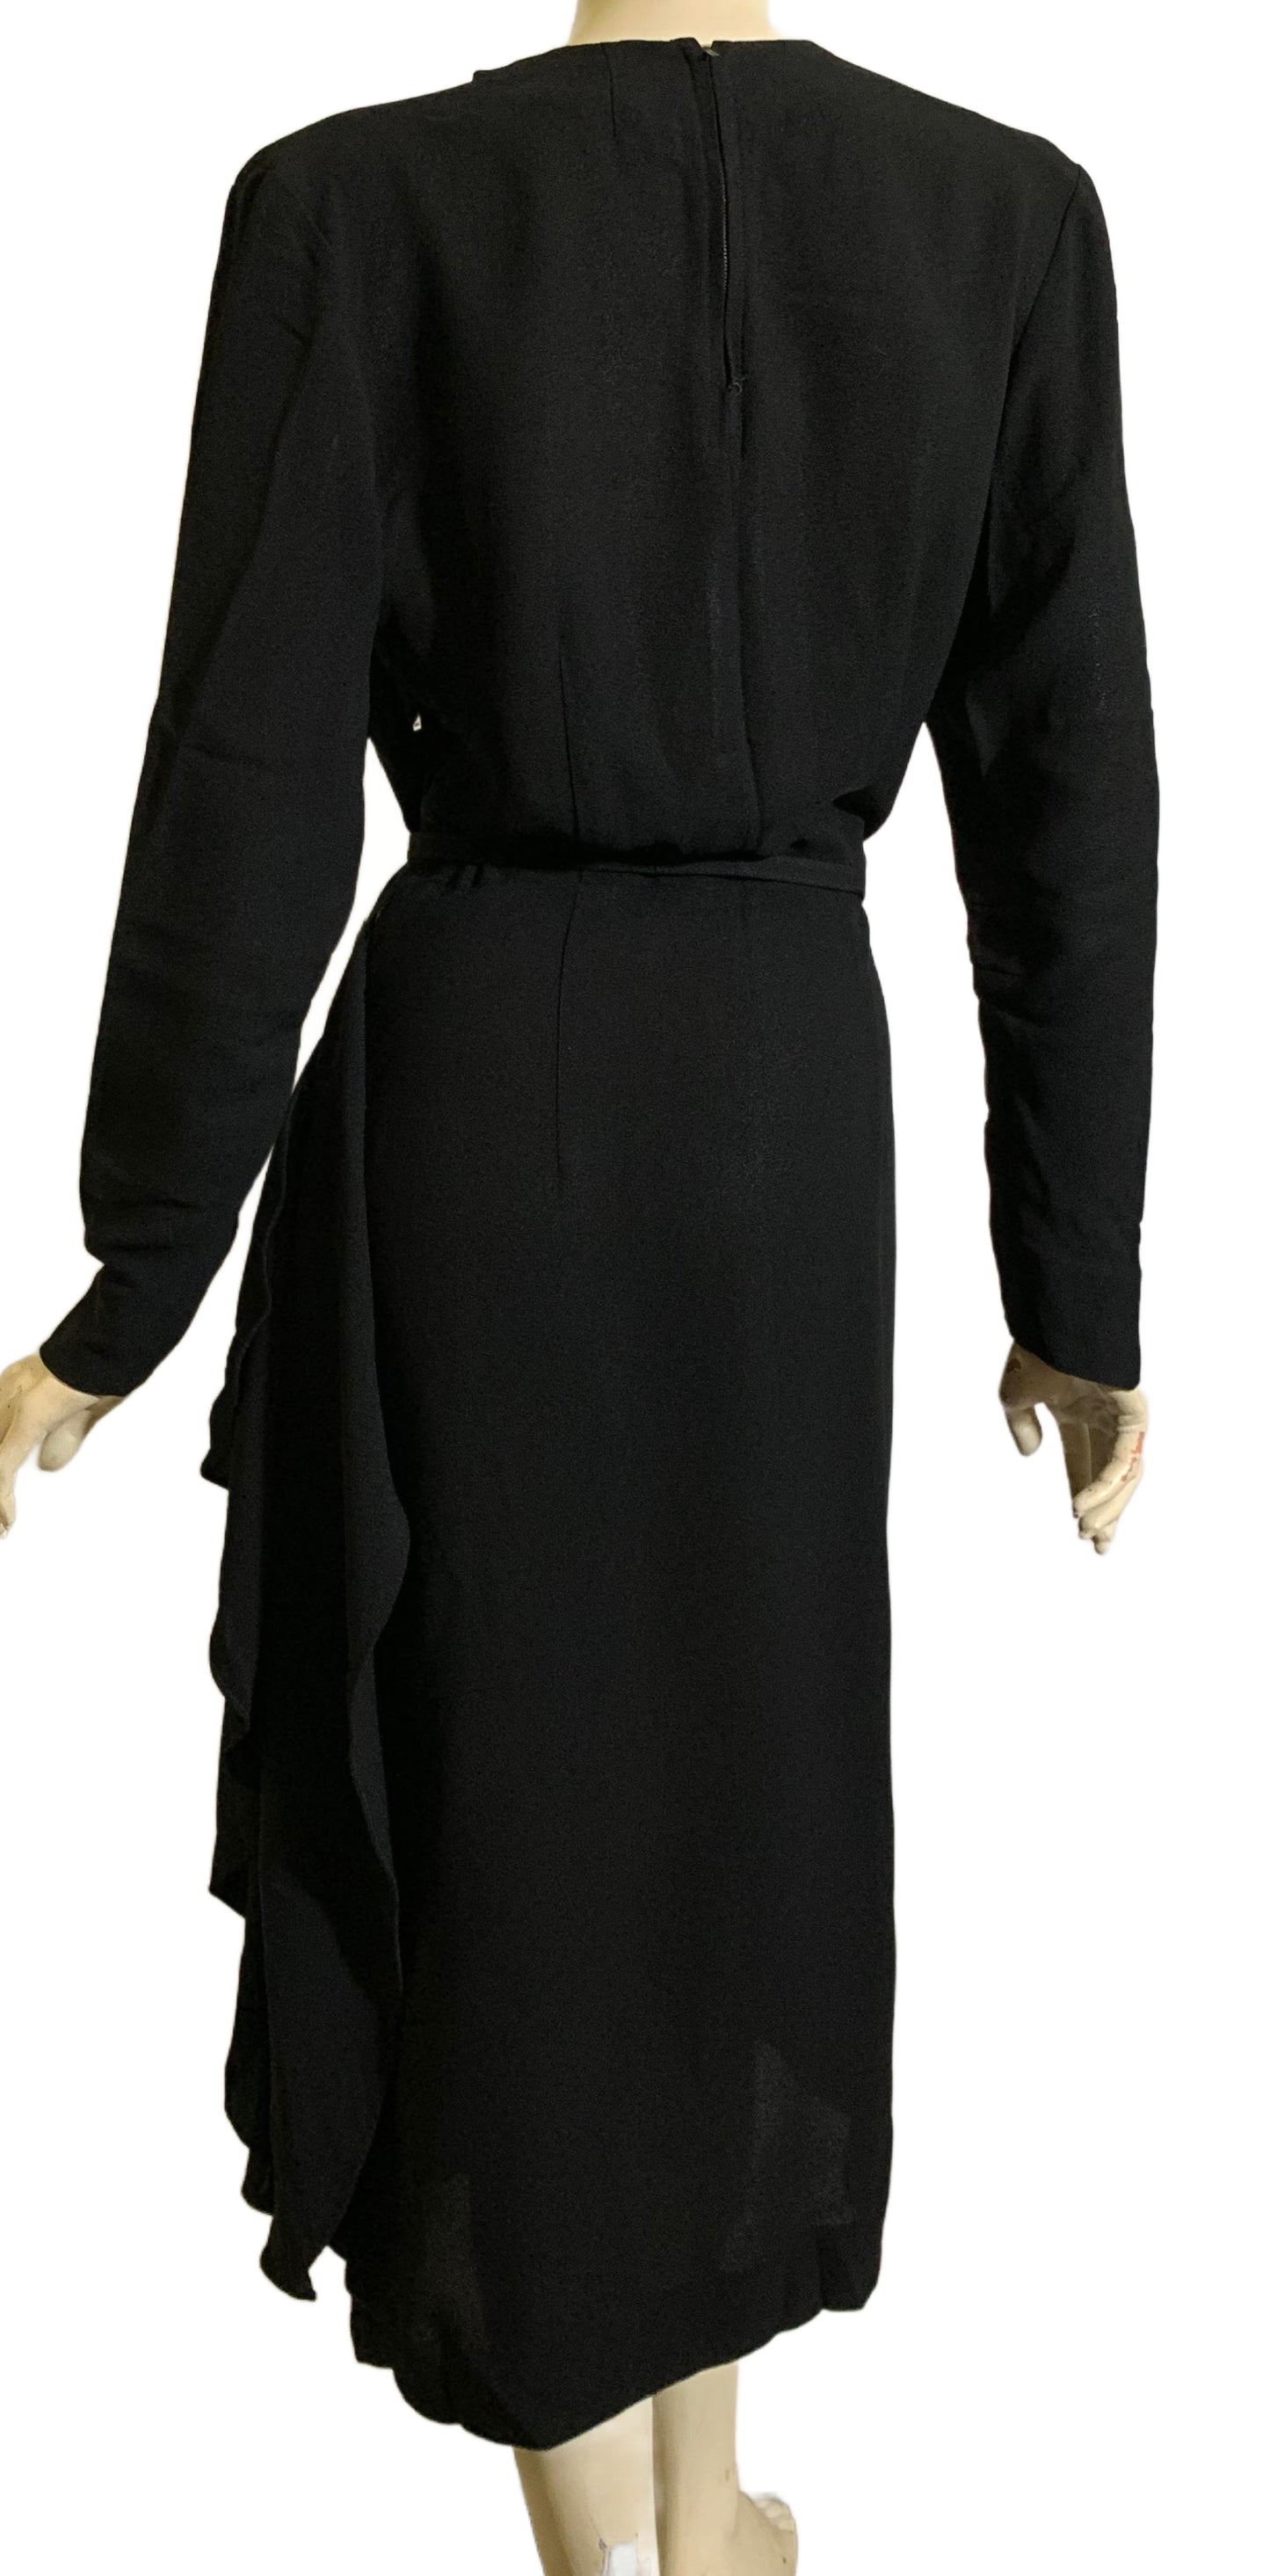 Long Sleeved Black Crepe Rayon Dress with Draped Hip and Seamed Shaping circa 1940s